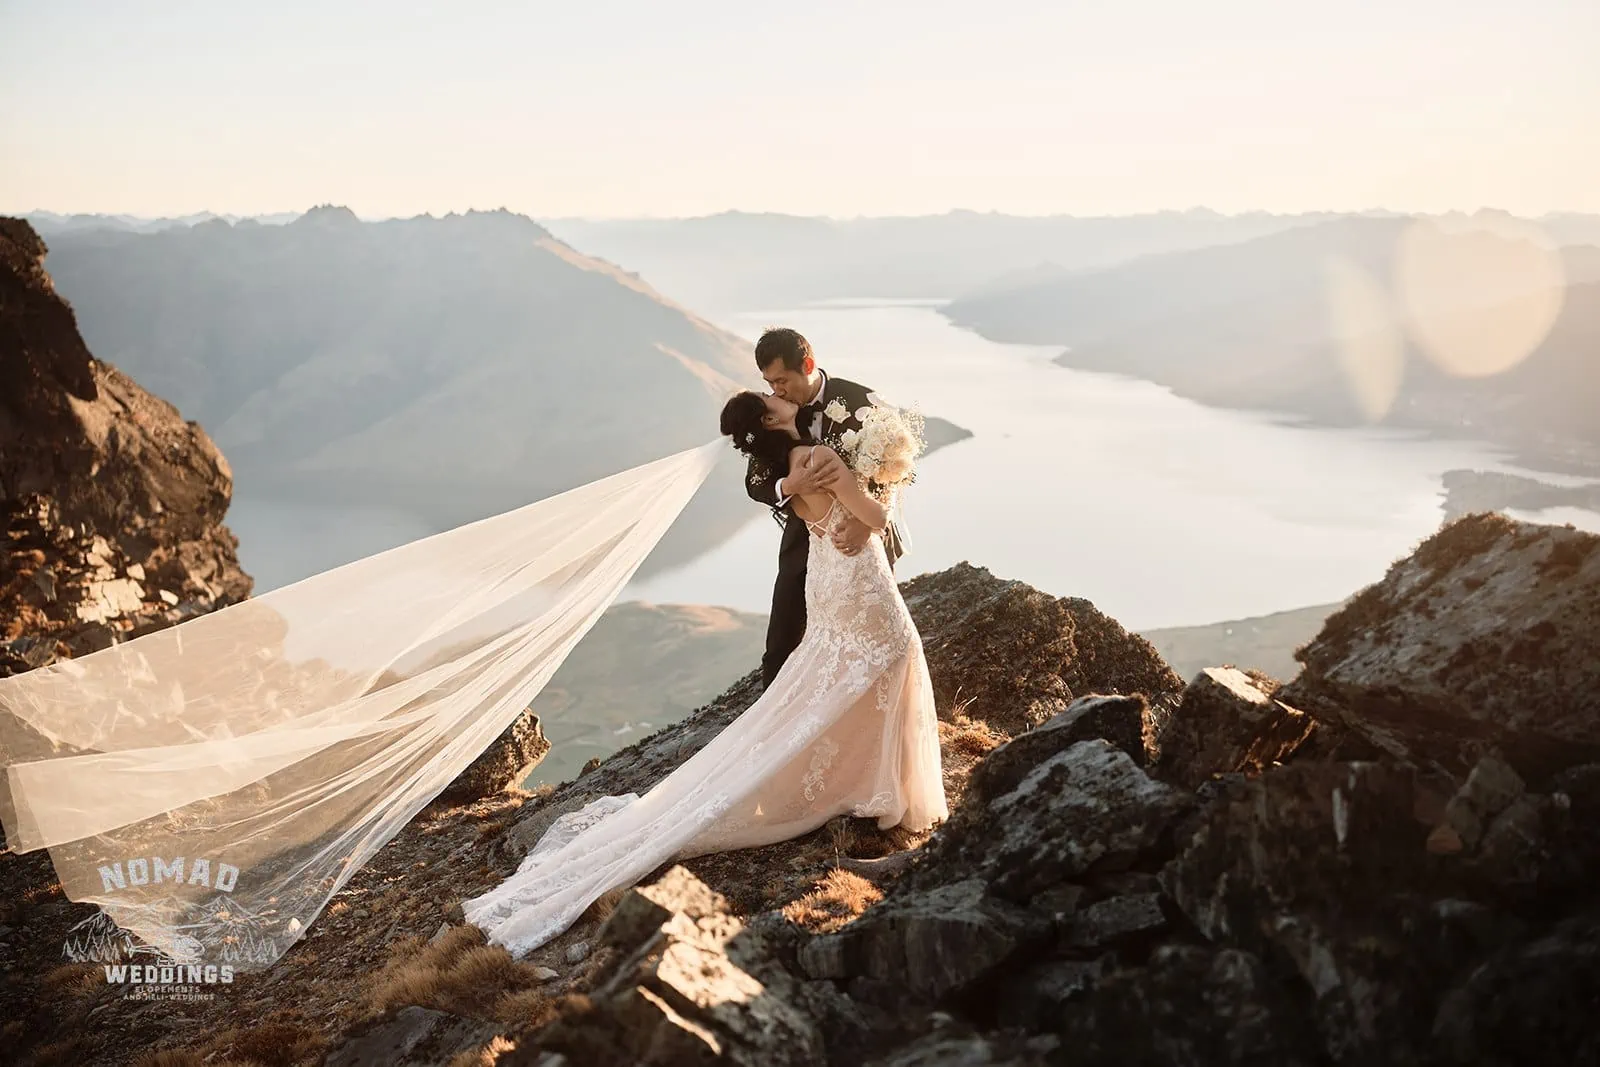 Connie and Andrew's pre-wedding shoot takes them to the top of The Remarkables, where they share a kiss overlooking Lake Wanaka.